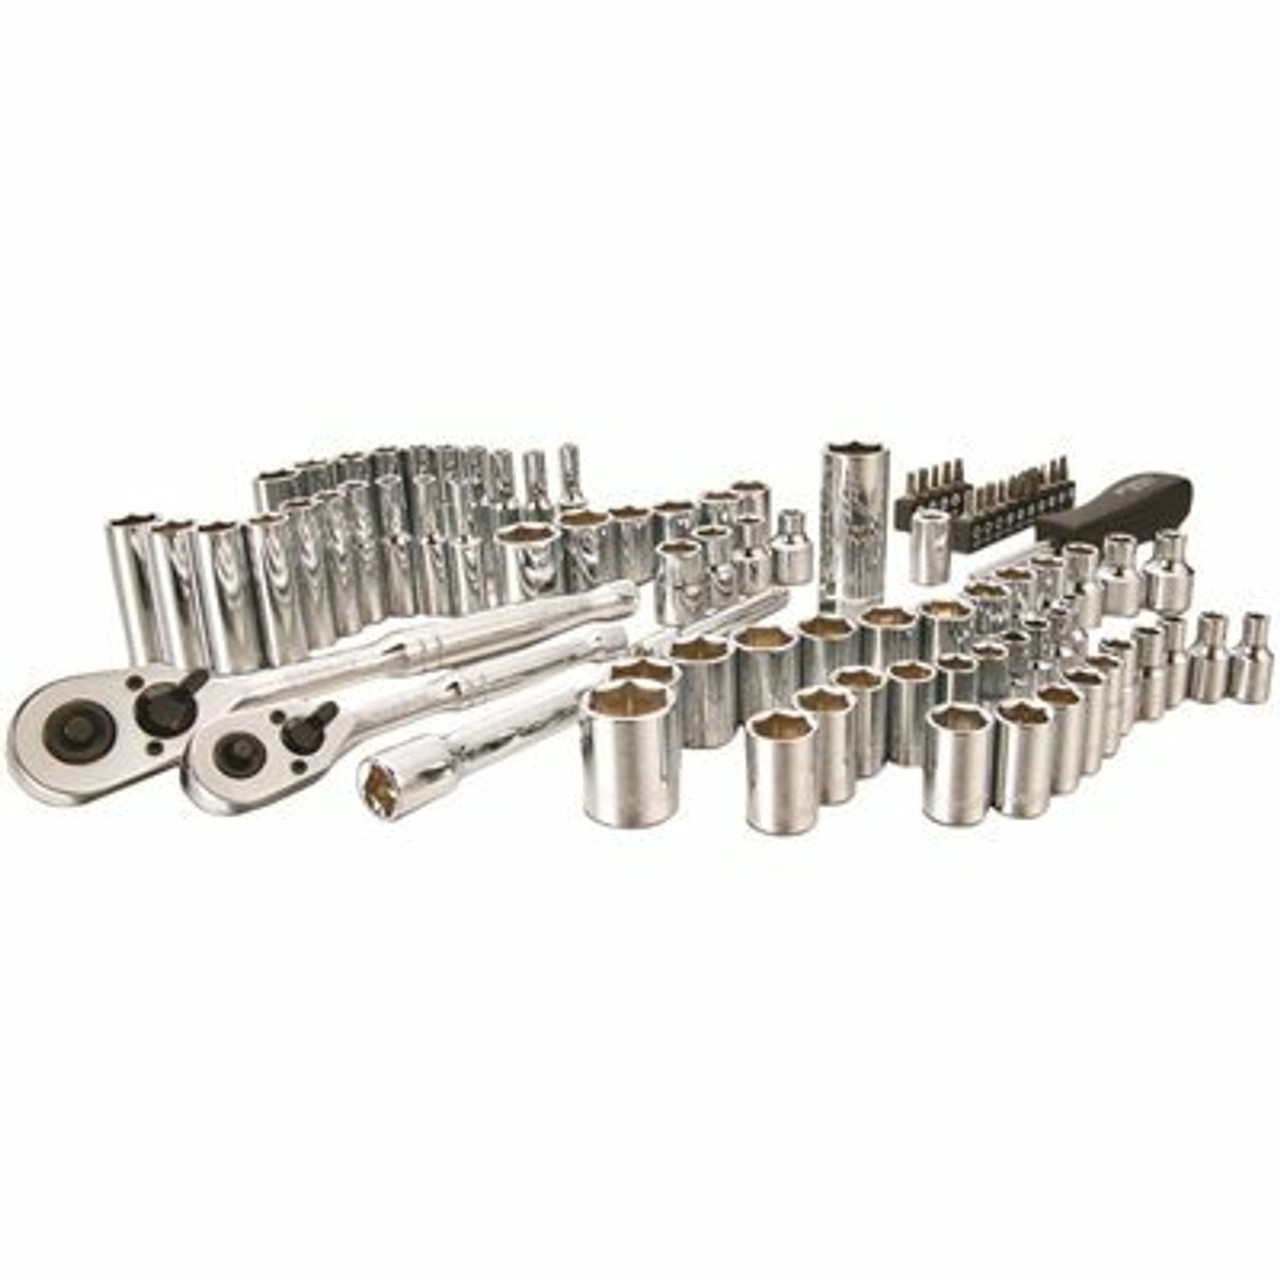 Stanley 1/4 In. And 3/8 In. Socket Set (85-Piece)